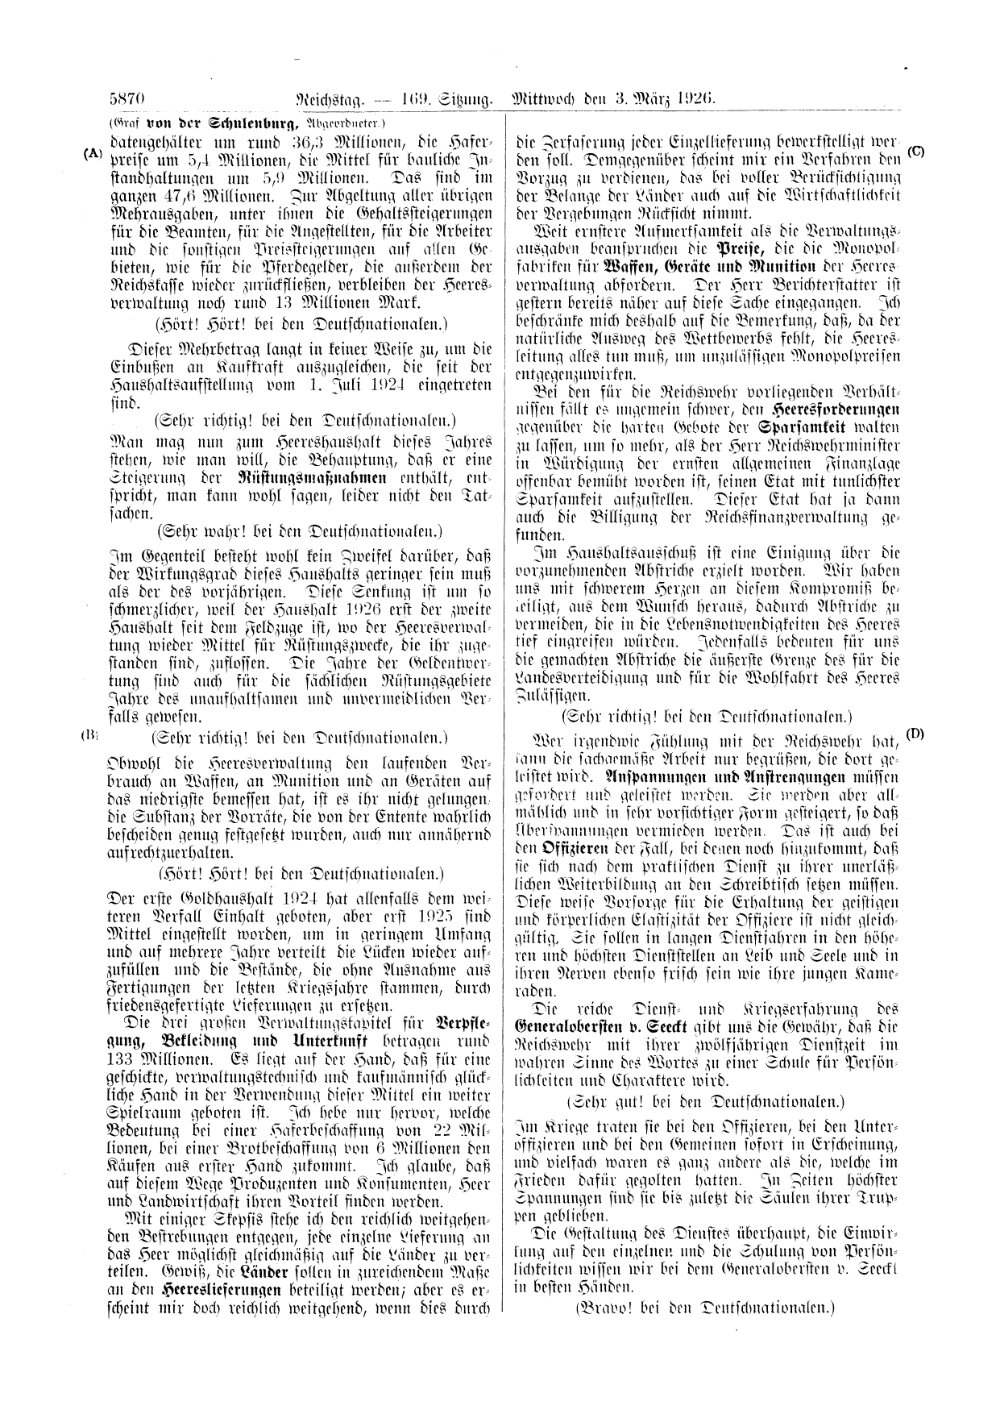 Scan of page 5870